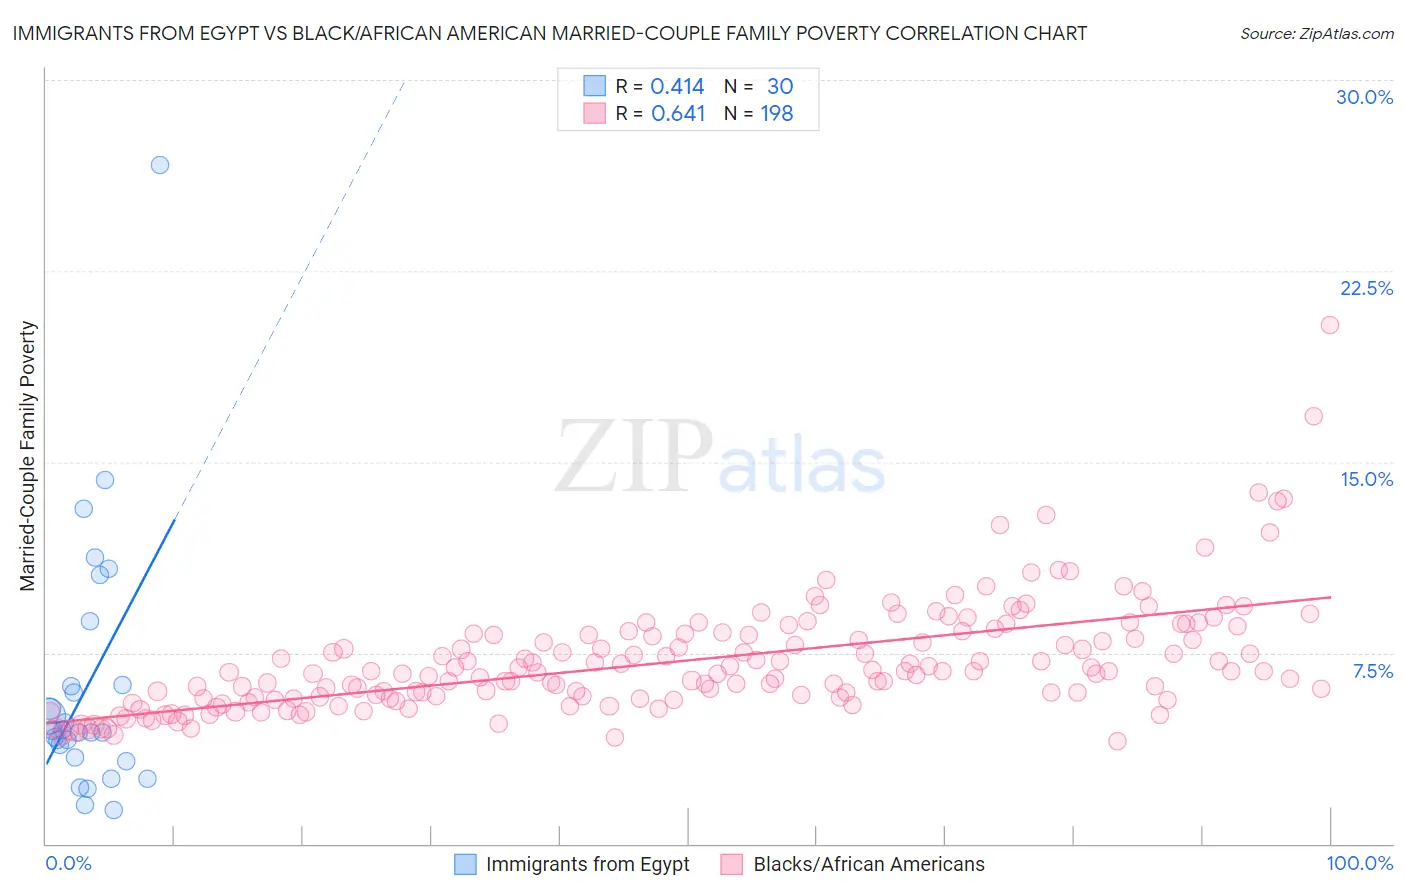 Immigrants from Egypt vs Black/African American Married-Couple Family Poverty